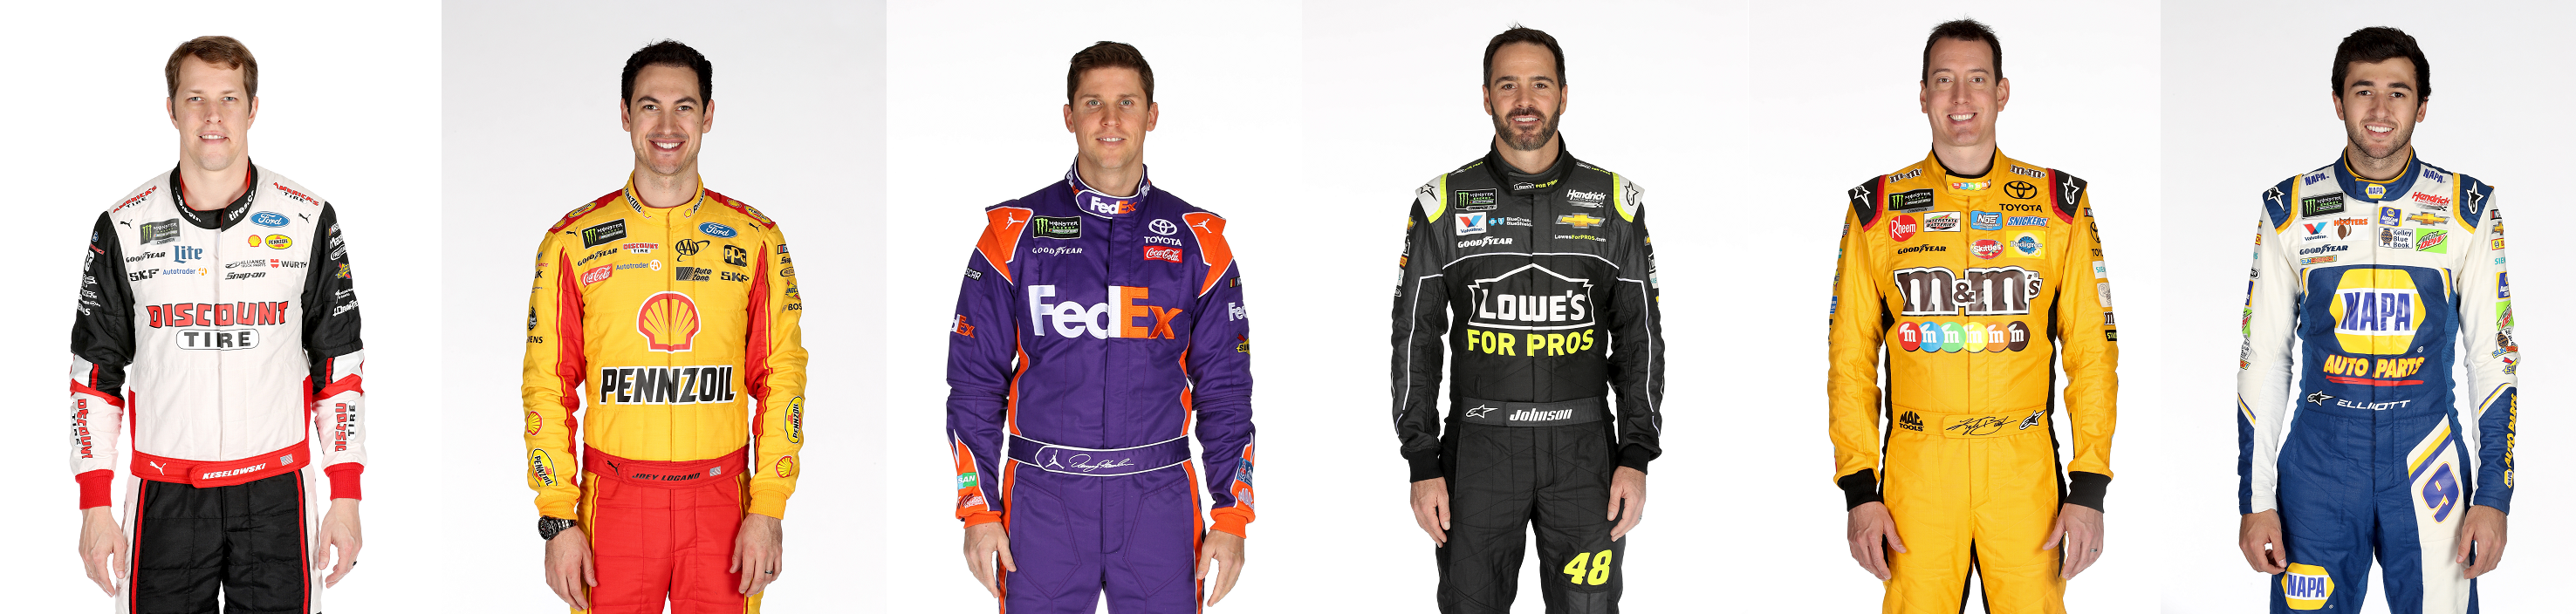 Six drivers, which of these will win?